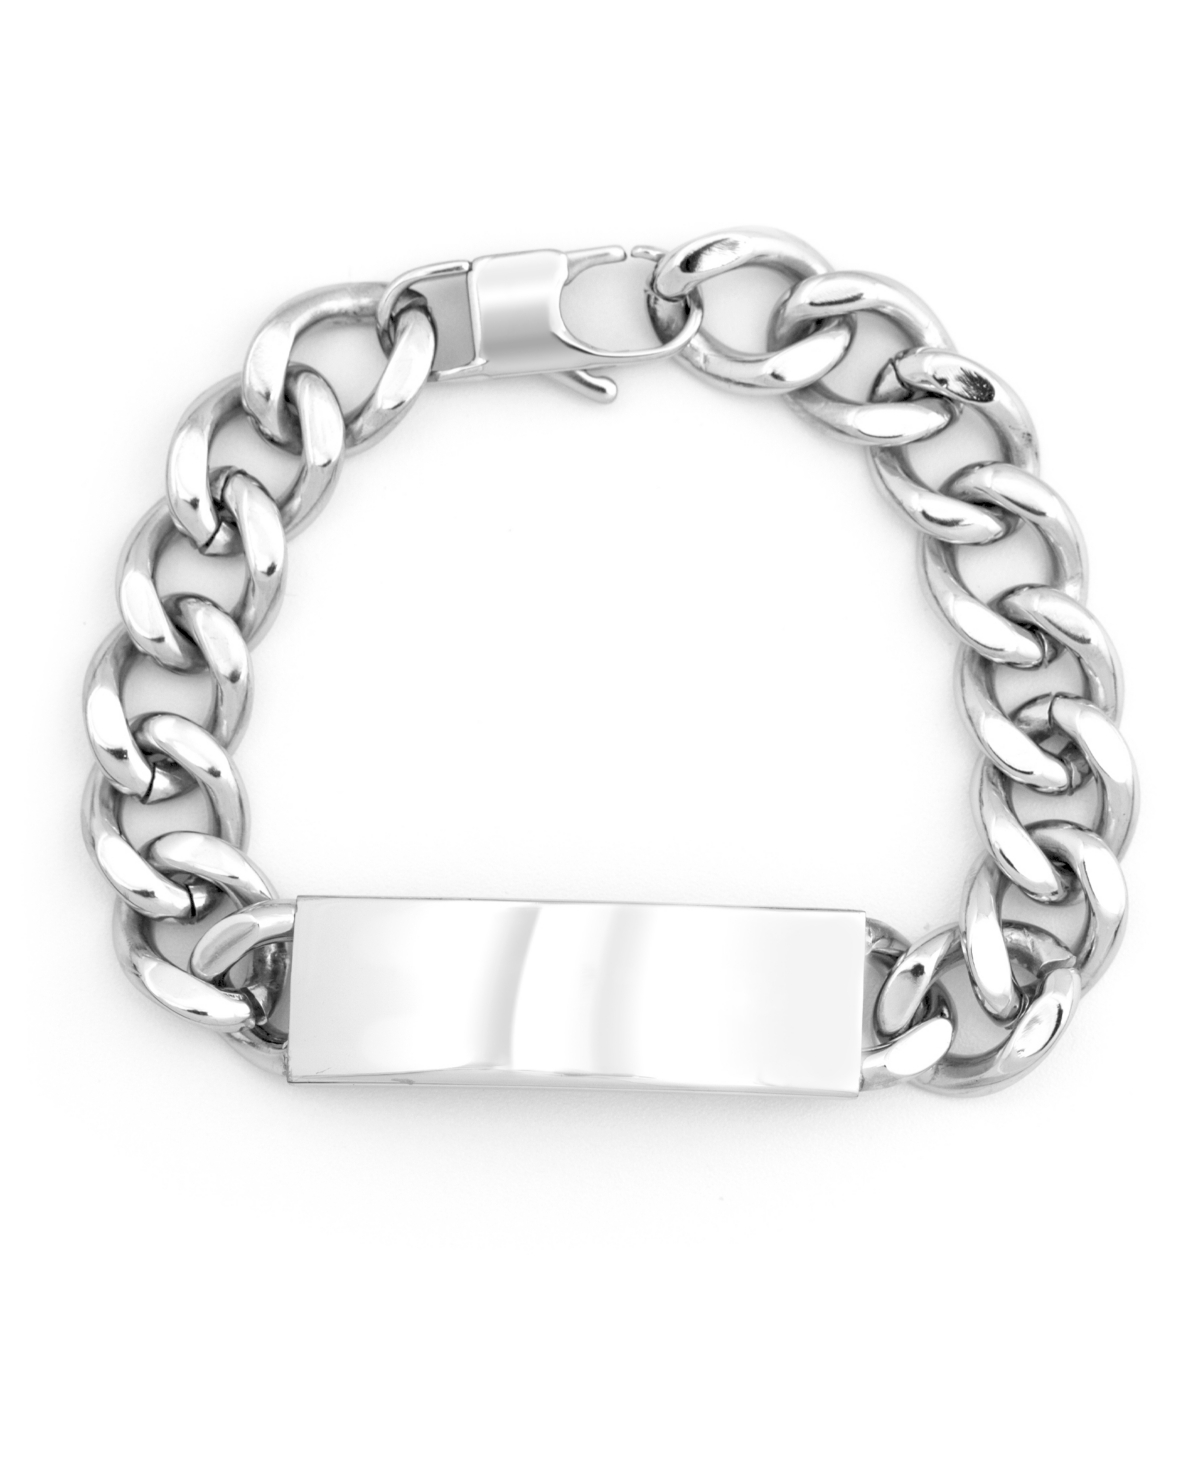 Eve's Jewelry Men's Silver Tone Stainless Steel Curb Link Id Bracelet